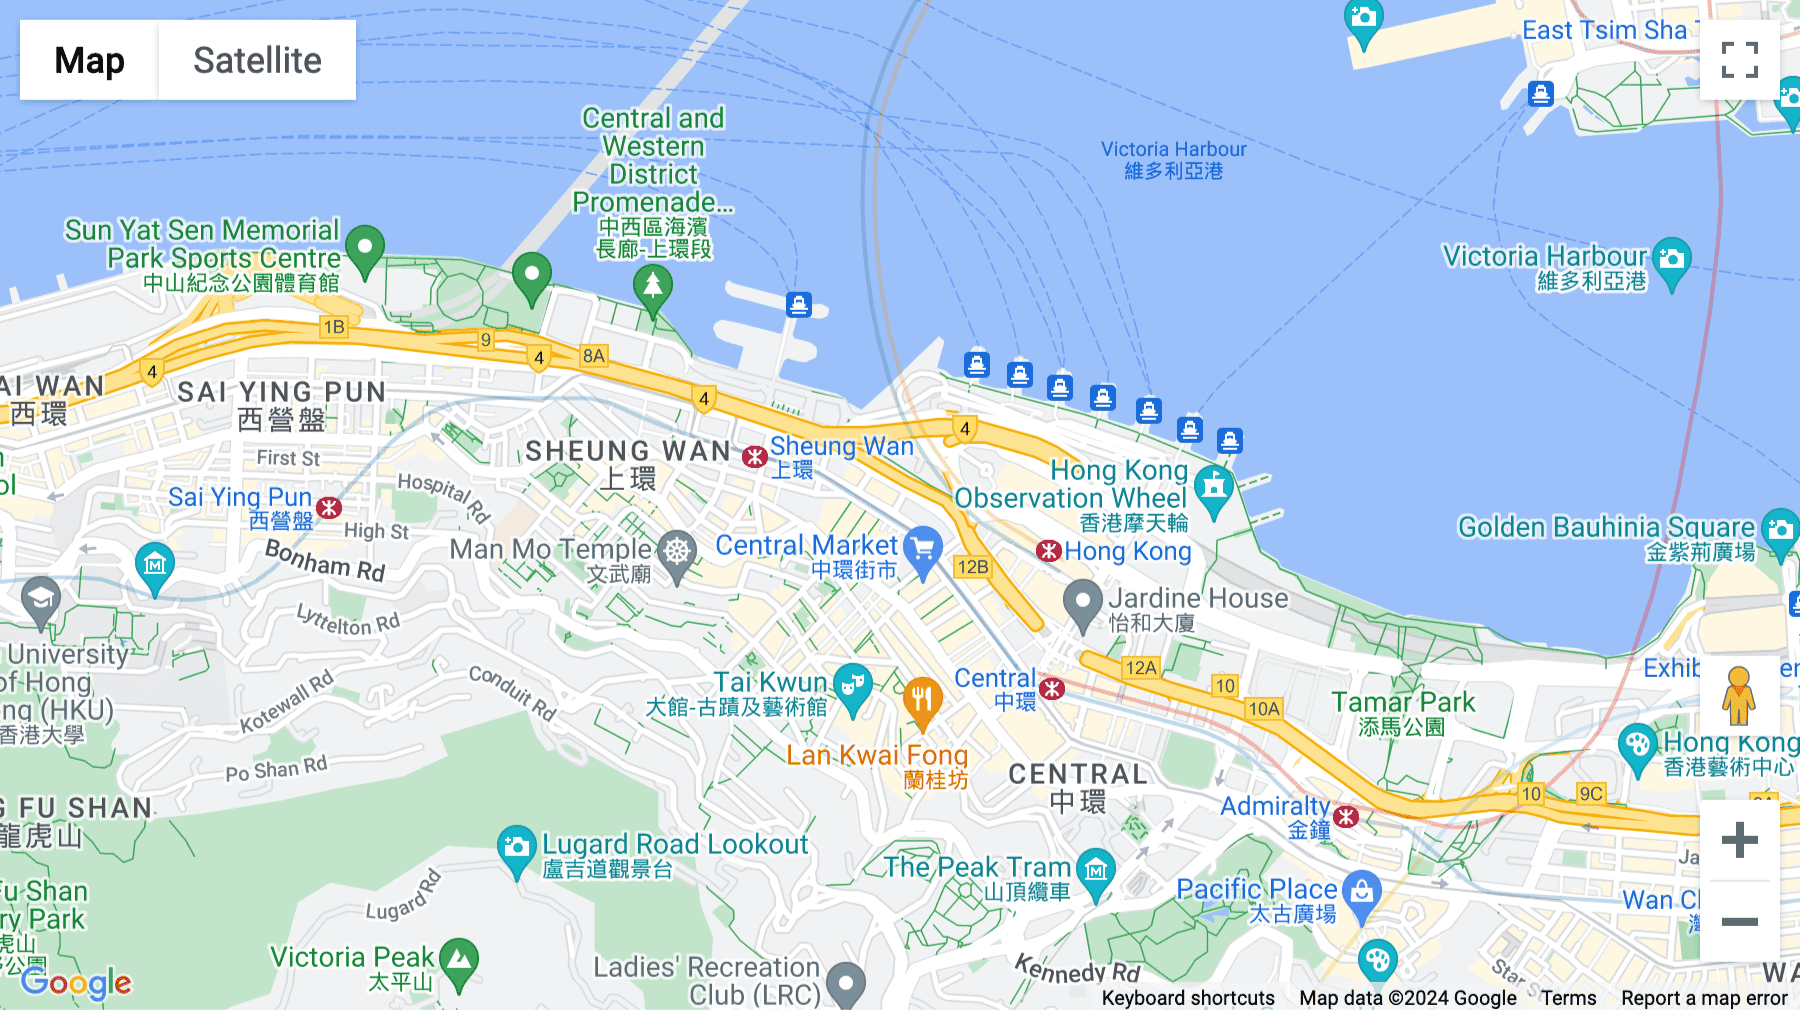 Click for interative map of Room 3, 2504, China Insurance Group Bldg, 141 Des Voeux Road, Central, Hong Kong